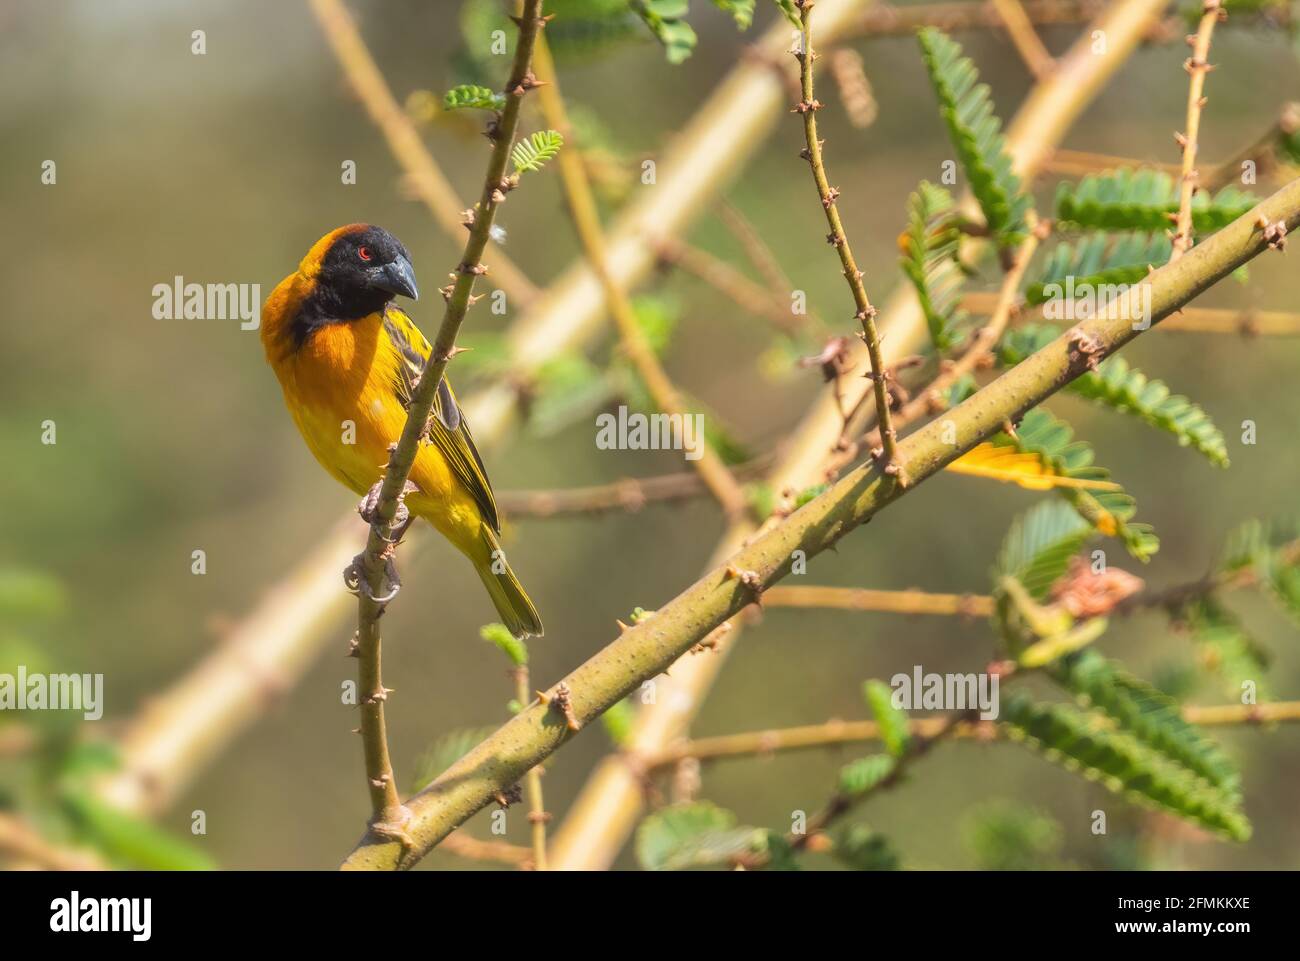 Village Weaver - Ploceus cucullatus, beautiful yellow and black perching bird from African woodlands and gardens, lake Ziway, Ethiopia. Stock Photo